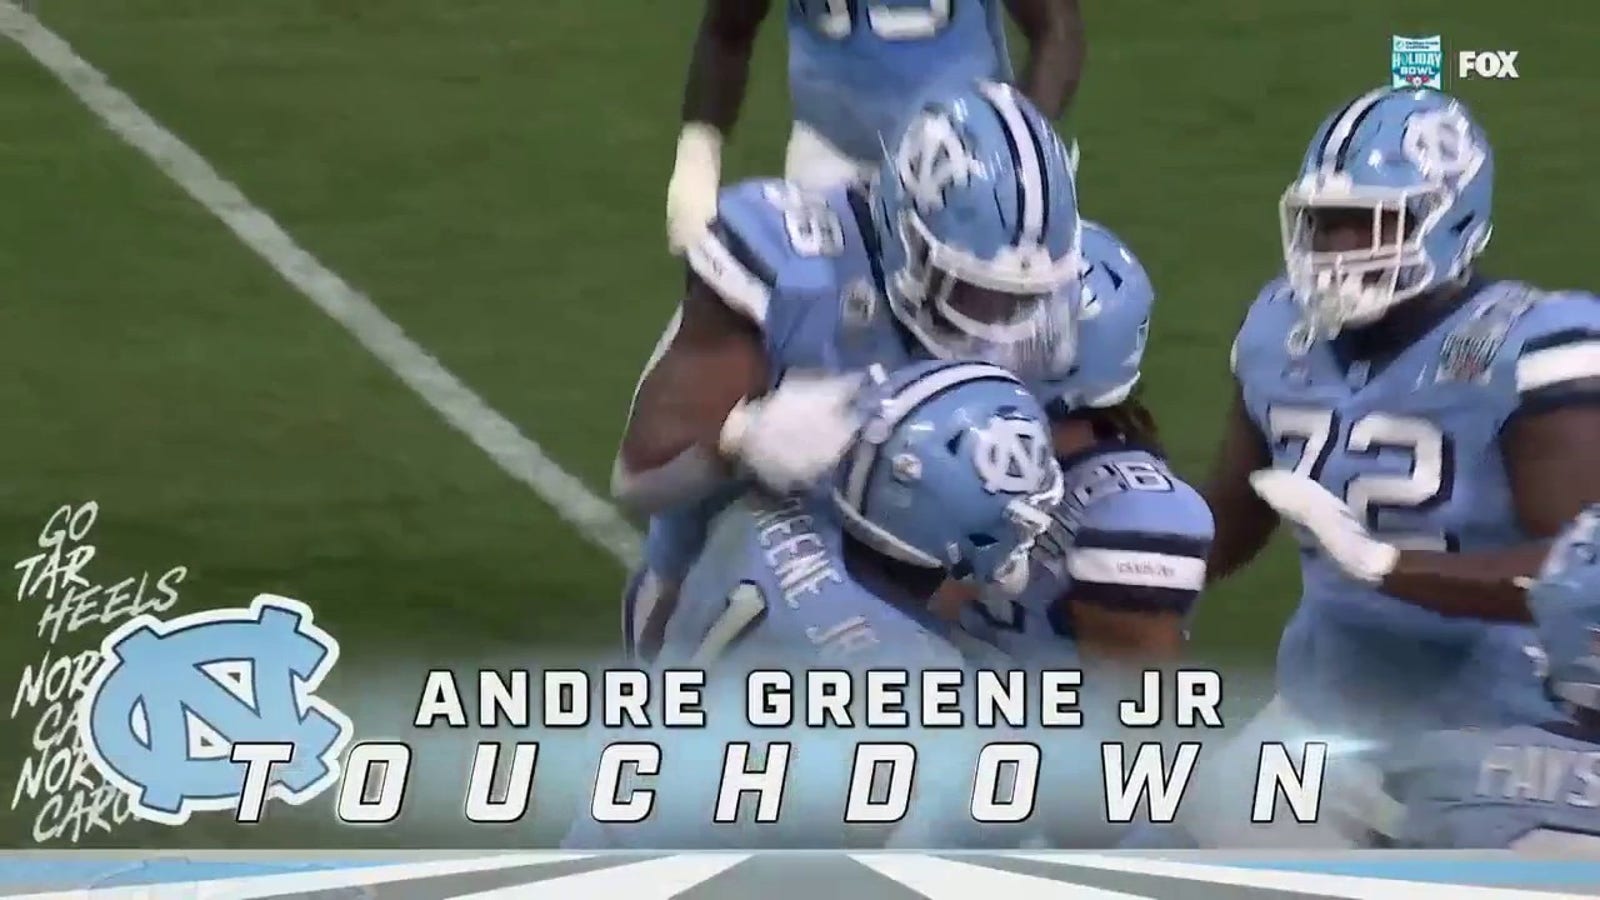 Drake Maye throws a dime to Andre Greene Jr. to tie it up